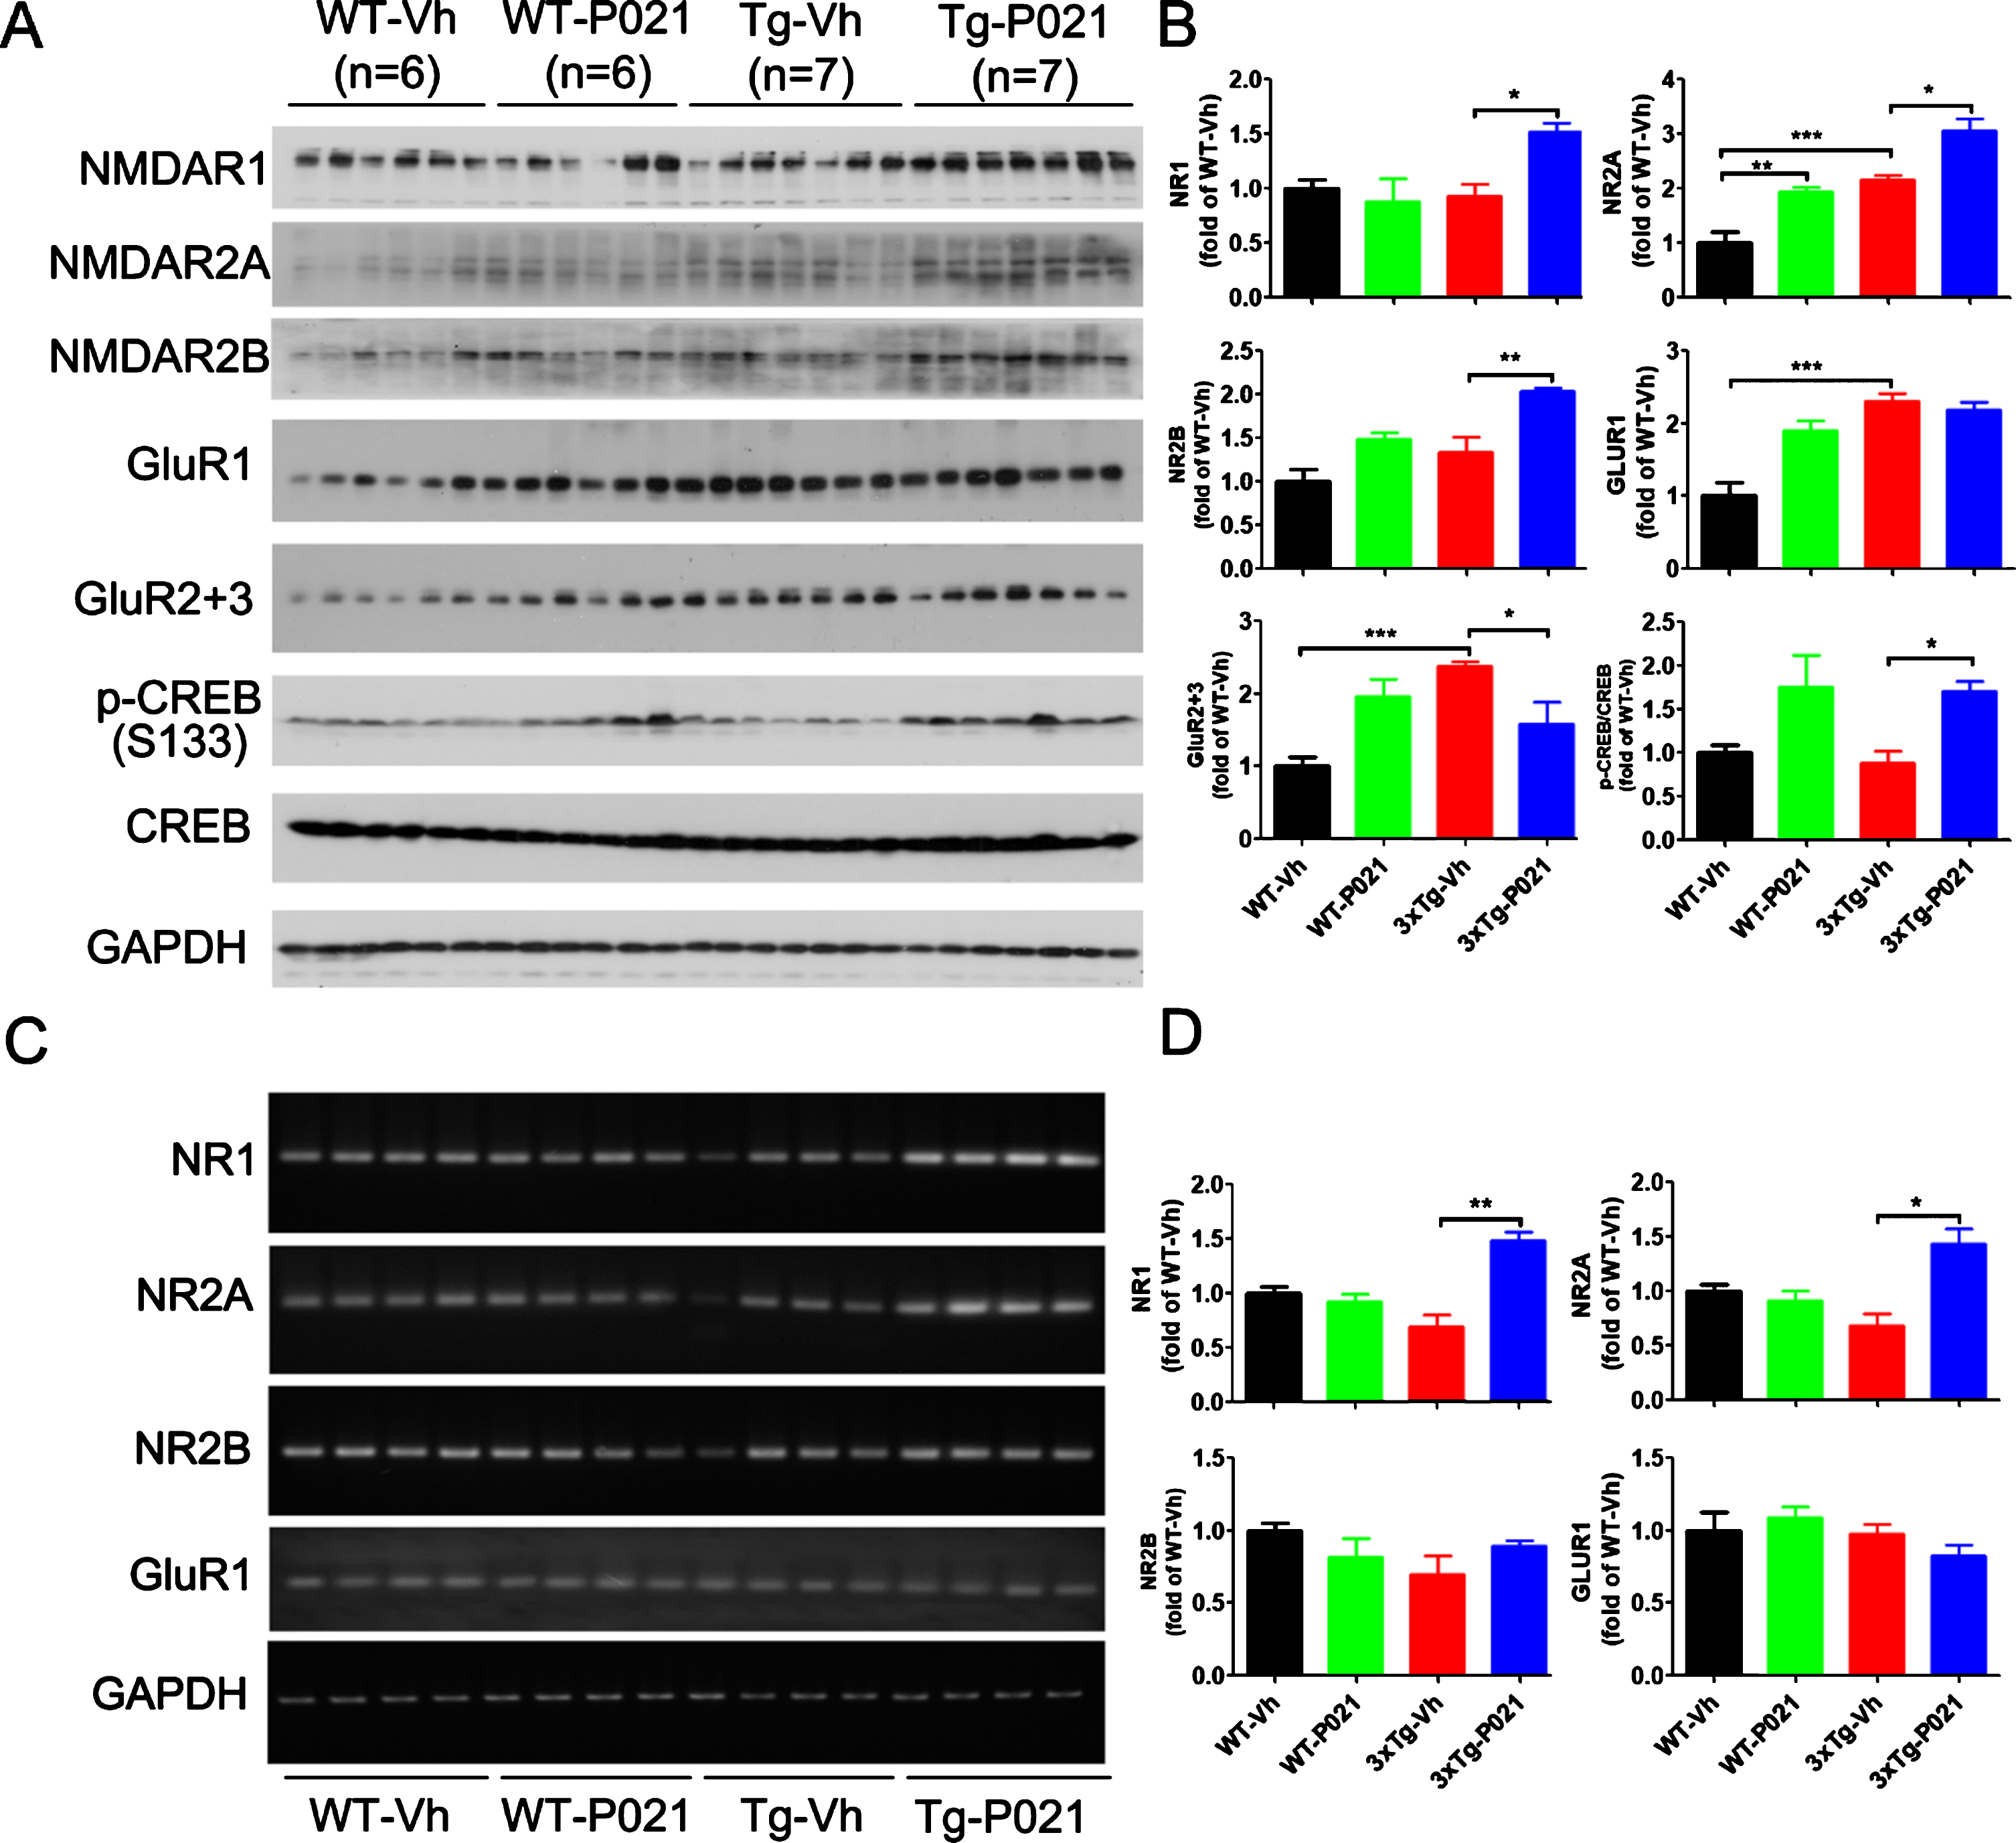 P021 treatment increases the NMDA receptor-dependent CREB activation in 3×Tg-AD mice. Protein levels in cortex (A) and the mRNA levels in hippocampus (C) were analyzed by Western blots and RT-PCR, respectively. Densitometric quantifications of western blots (B) and RT-PCR (D) were normalized against the loading control GAPDH. The protein expressions of NMDAR1 (p = 0.0107), NMDAR2A (p = 0.0156), NMDAR2B (p = 0.0027) and the ratio of p-CREB/CREB (p = 0.0126) were increased after treatment with P021 (A, B), whereas GluR2 + 3 was decreased (p = 0.0249). The mRNA levels of NMDAR1 (p = 0.0012) and NMDAR2A (p = 0.0155) in hippocampus were increased after treatment with P021 (C, D). Data were analyzed by two-way ANOVA followed by a Tukey’s multiple comparisons test and are expressed as mean±S.E.M. *p < 0.05, **p < 0.01.